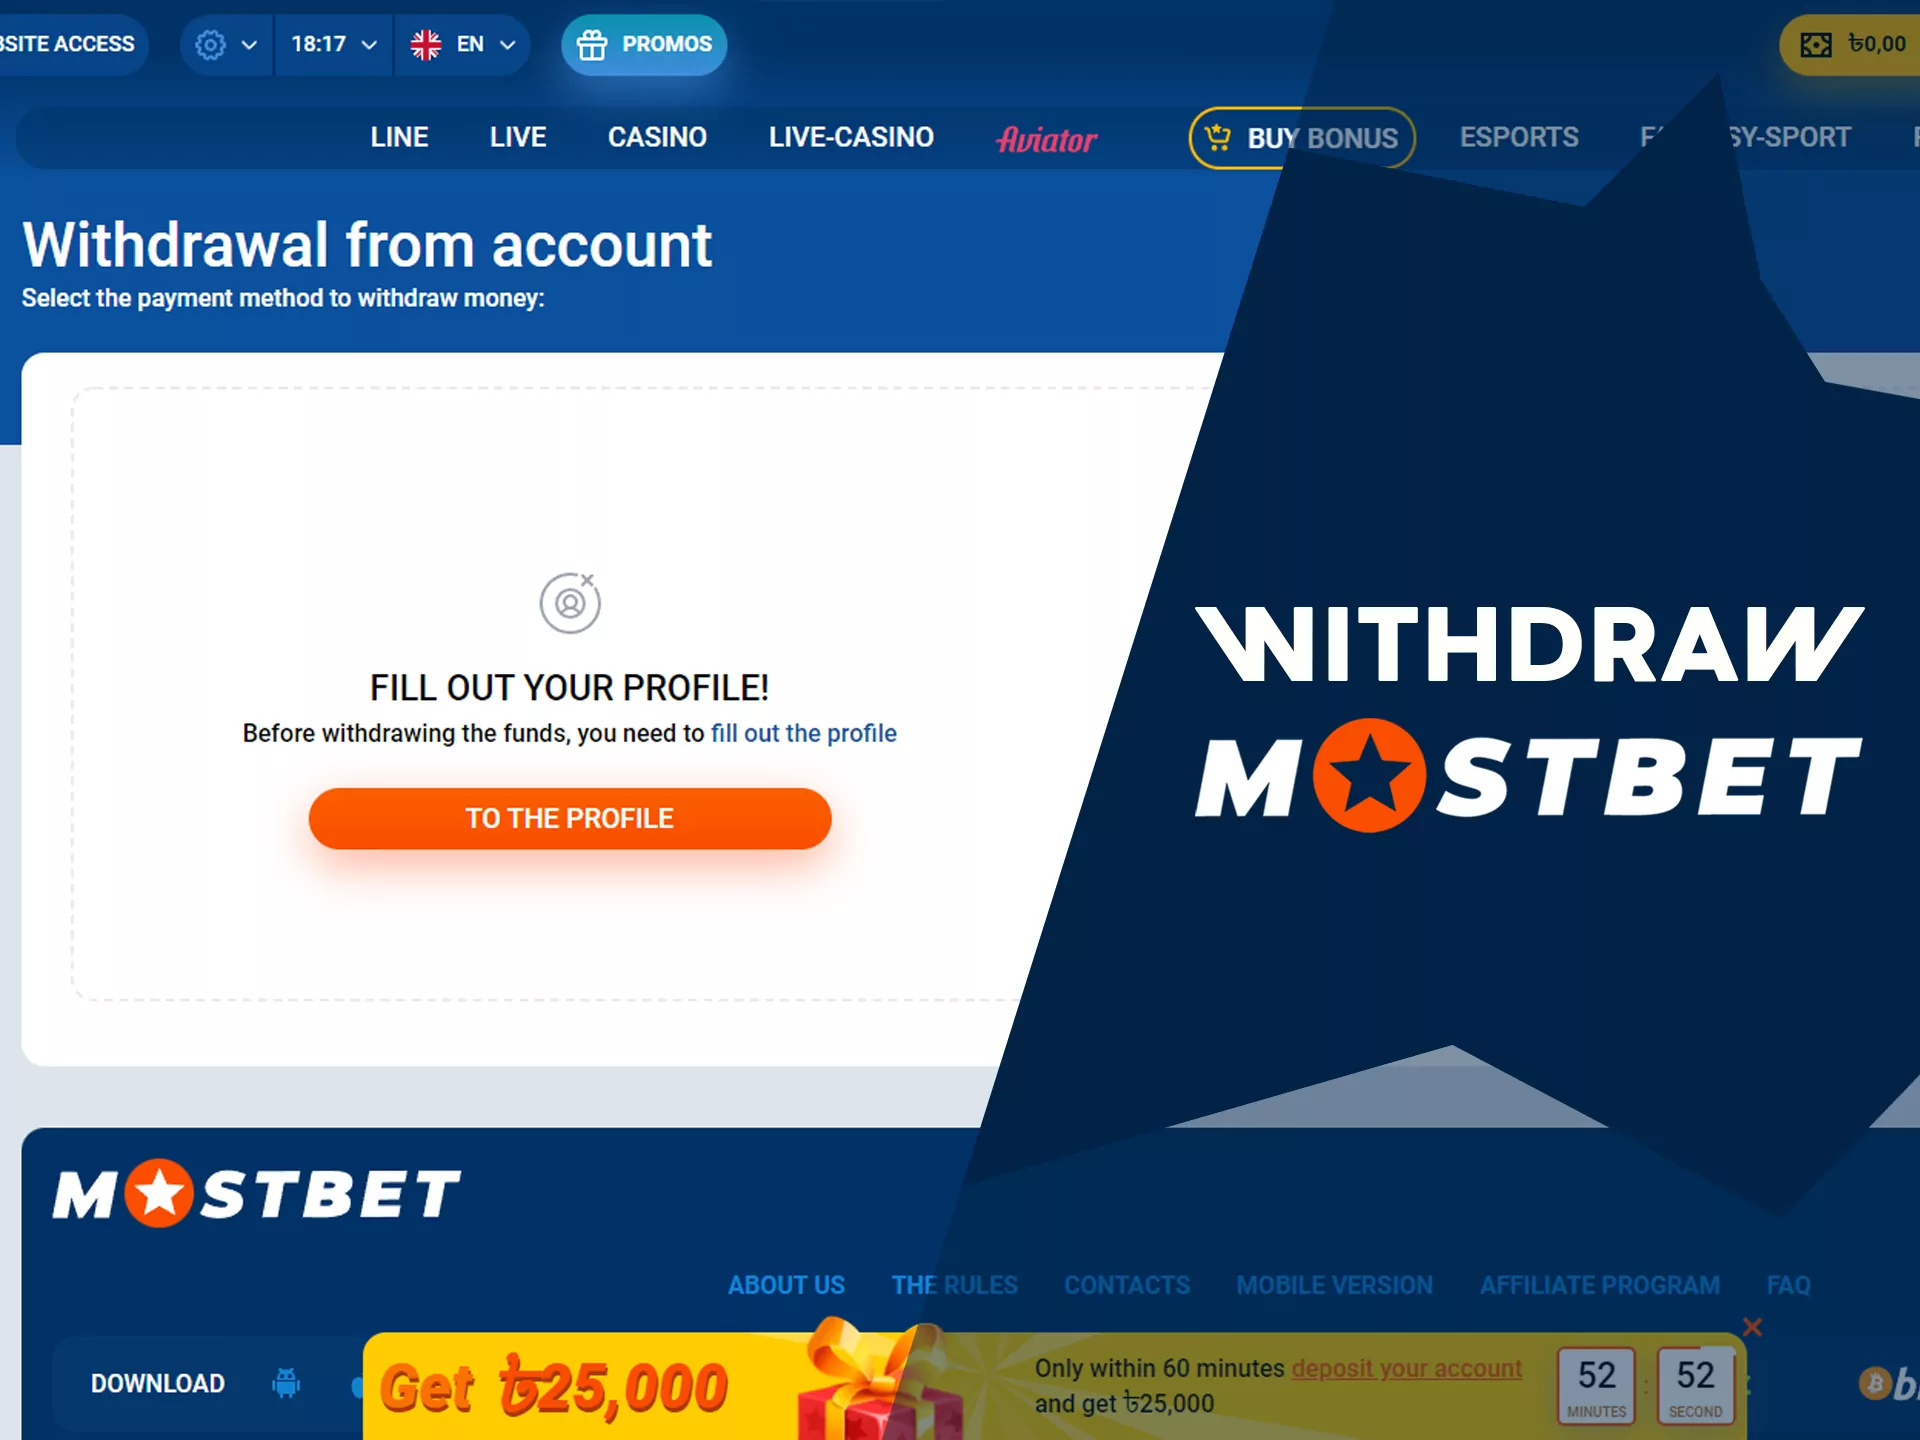 For withdraw money from your Mostbet account you need to fill out your profile.